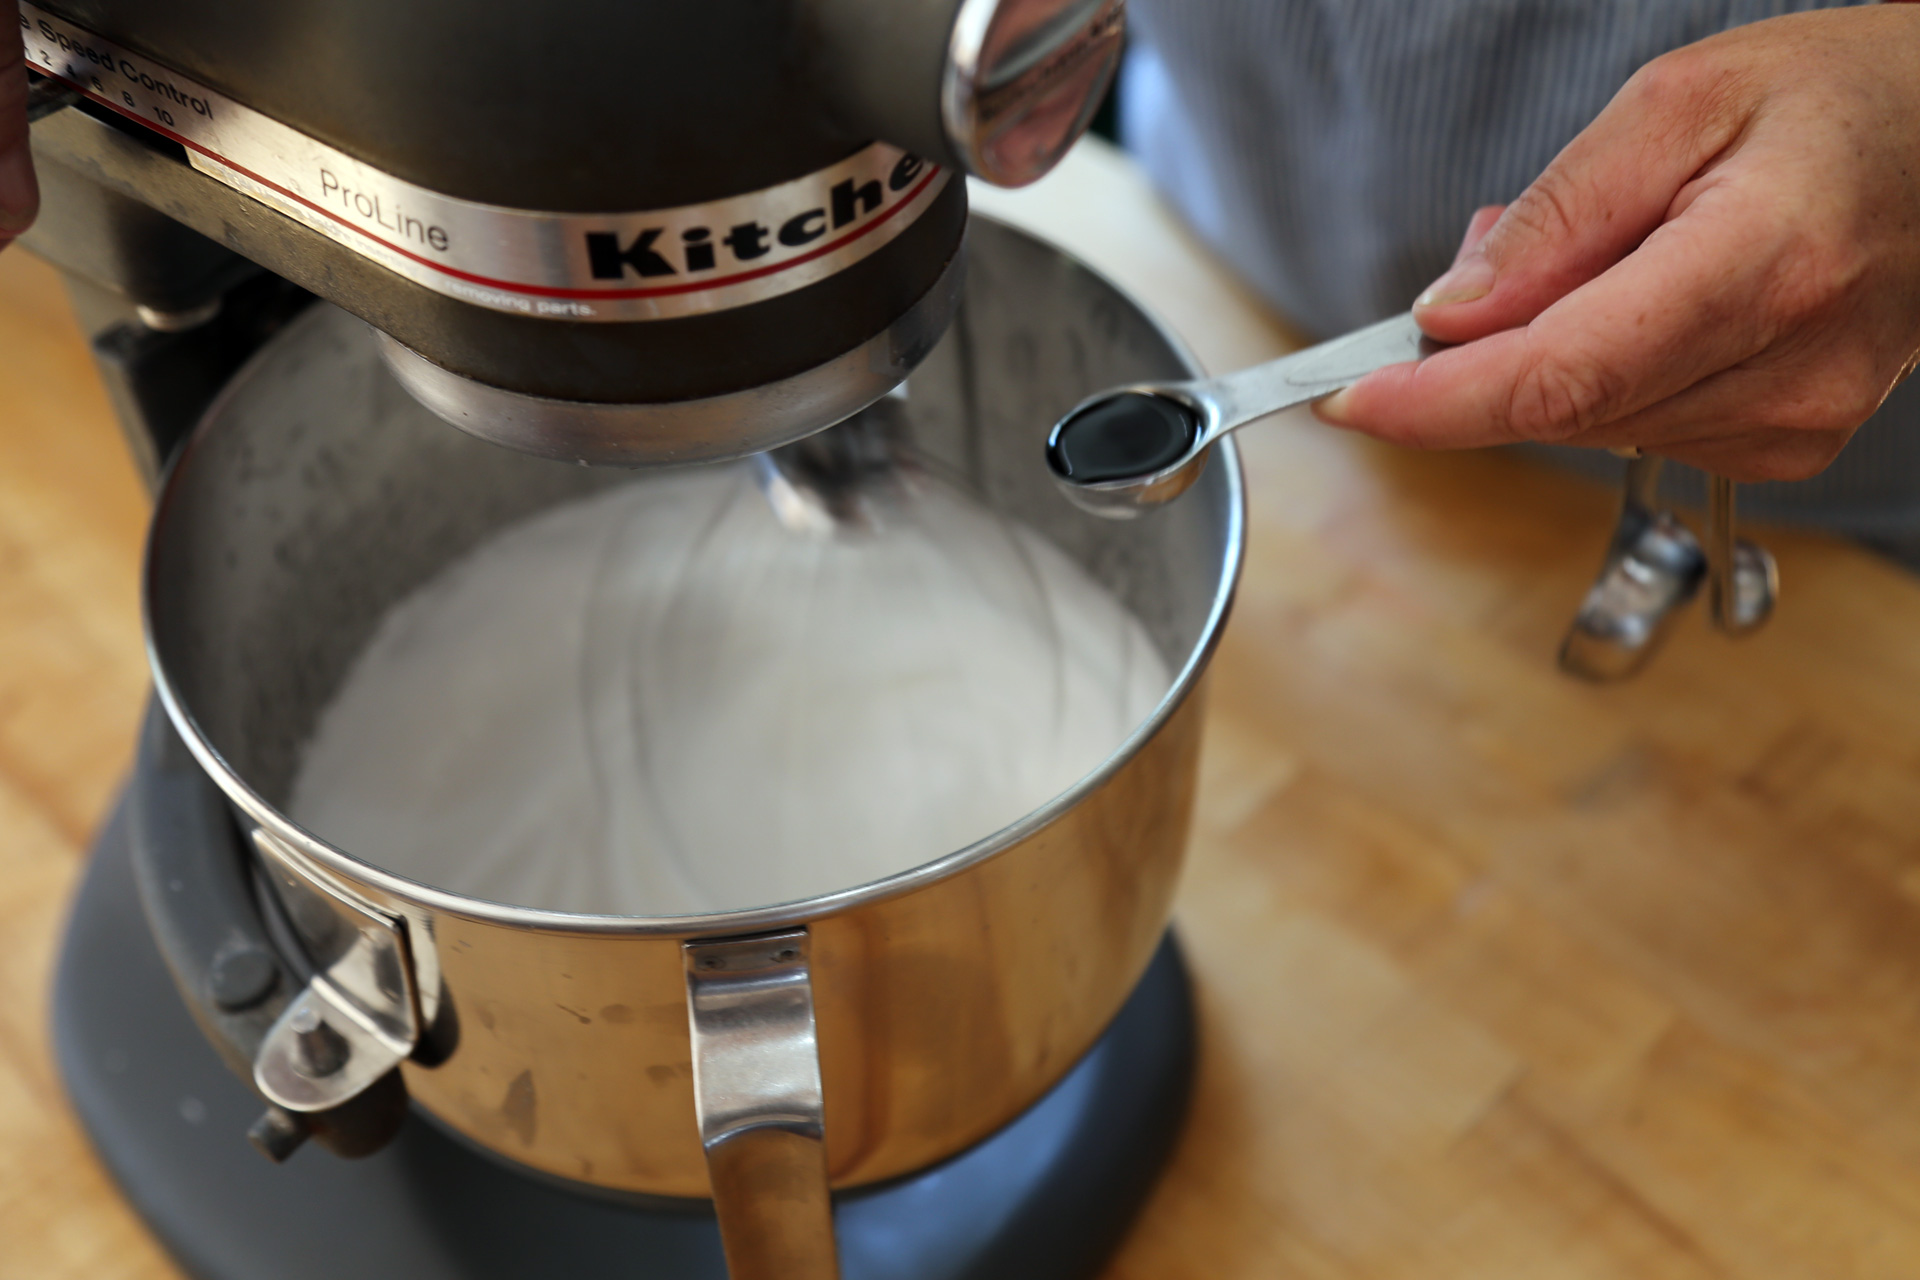 Turn the mixer up to medium-high and whip the mixture until it lightens and thickens, about 5 minutes. Add the vanilla.